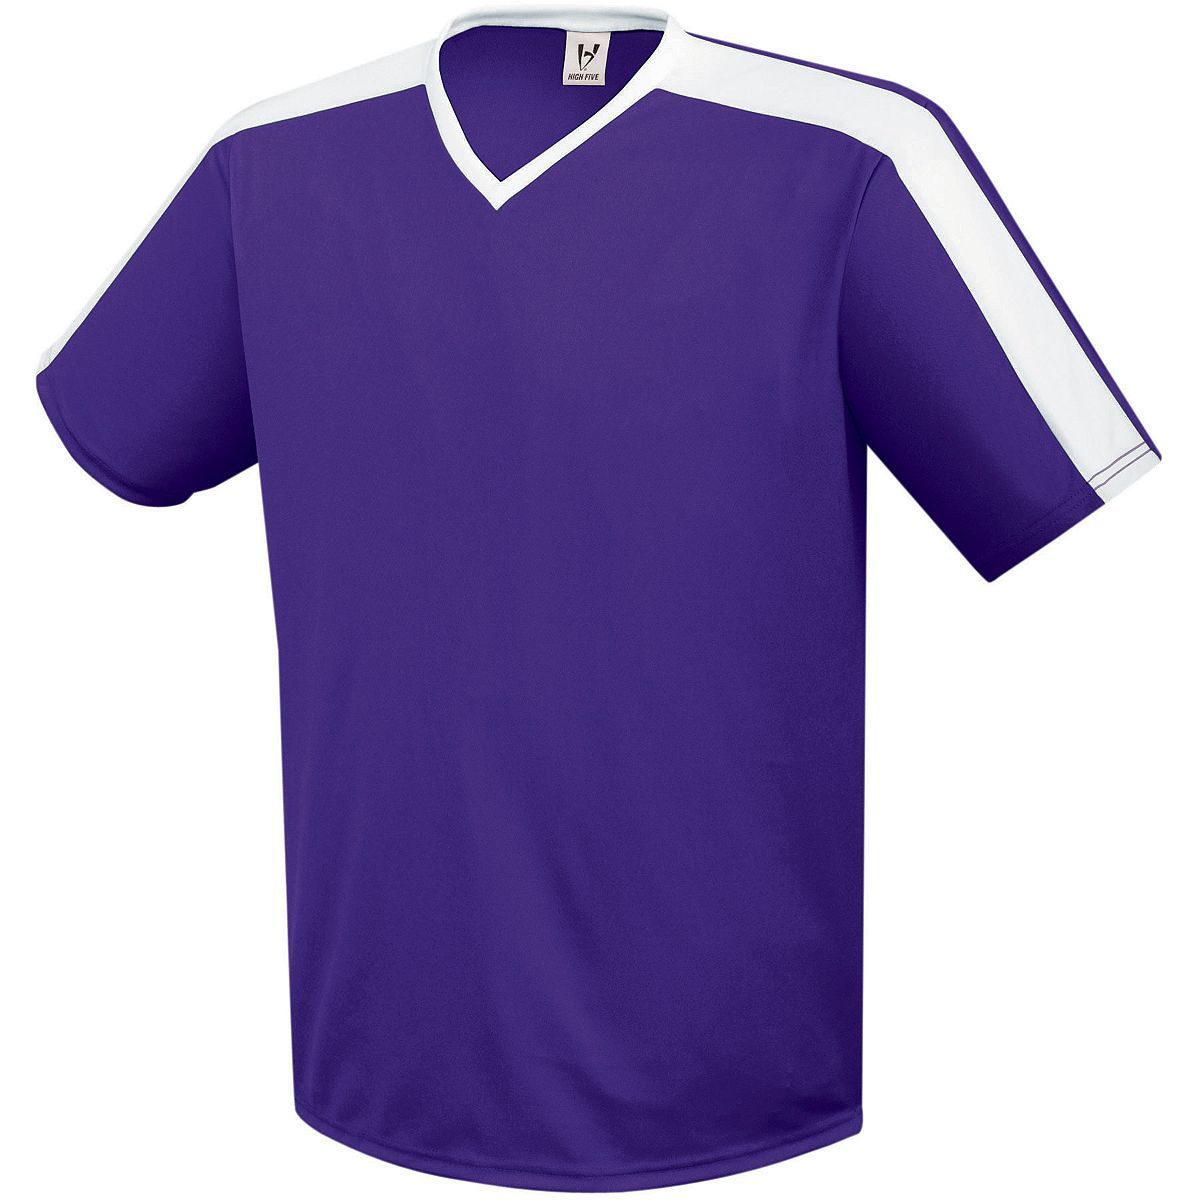 High 5 Genesis Soccer Jersey in Purple/White  -Part of the Adult, Adult-Jersey, High5-Products, Soccer, Shirts, All-Sports-1 product lines at KanaleyCreations.com